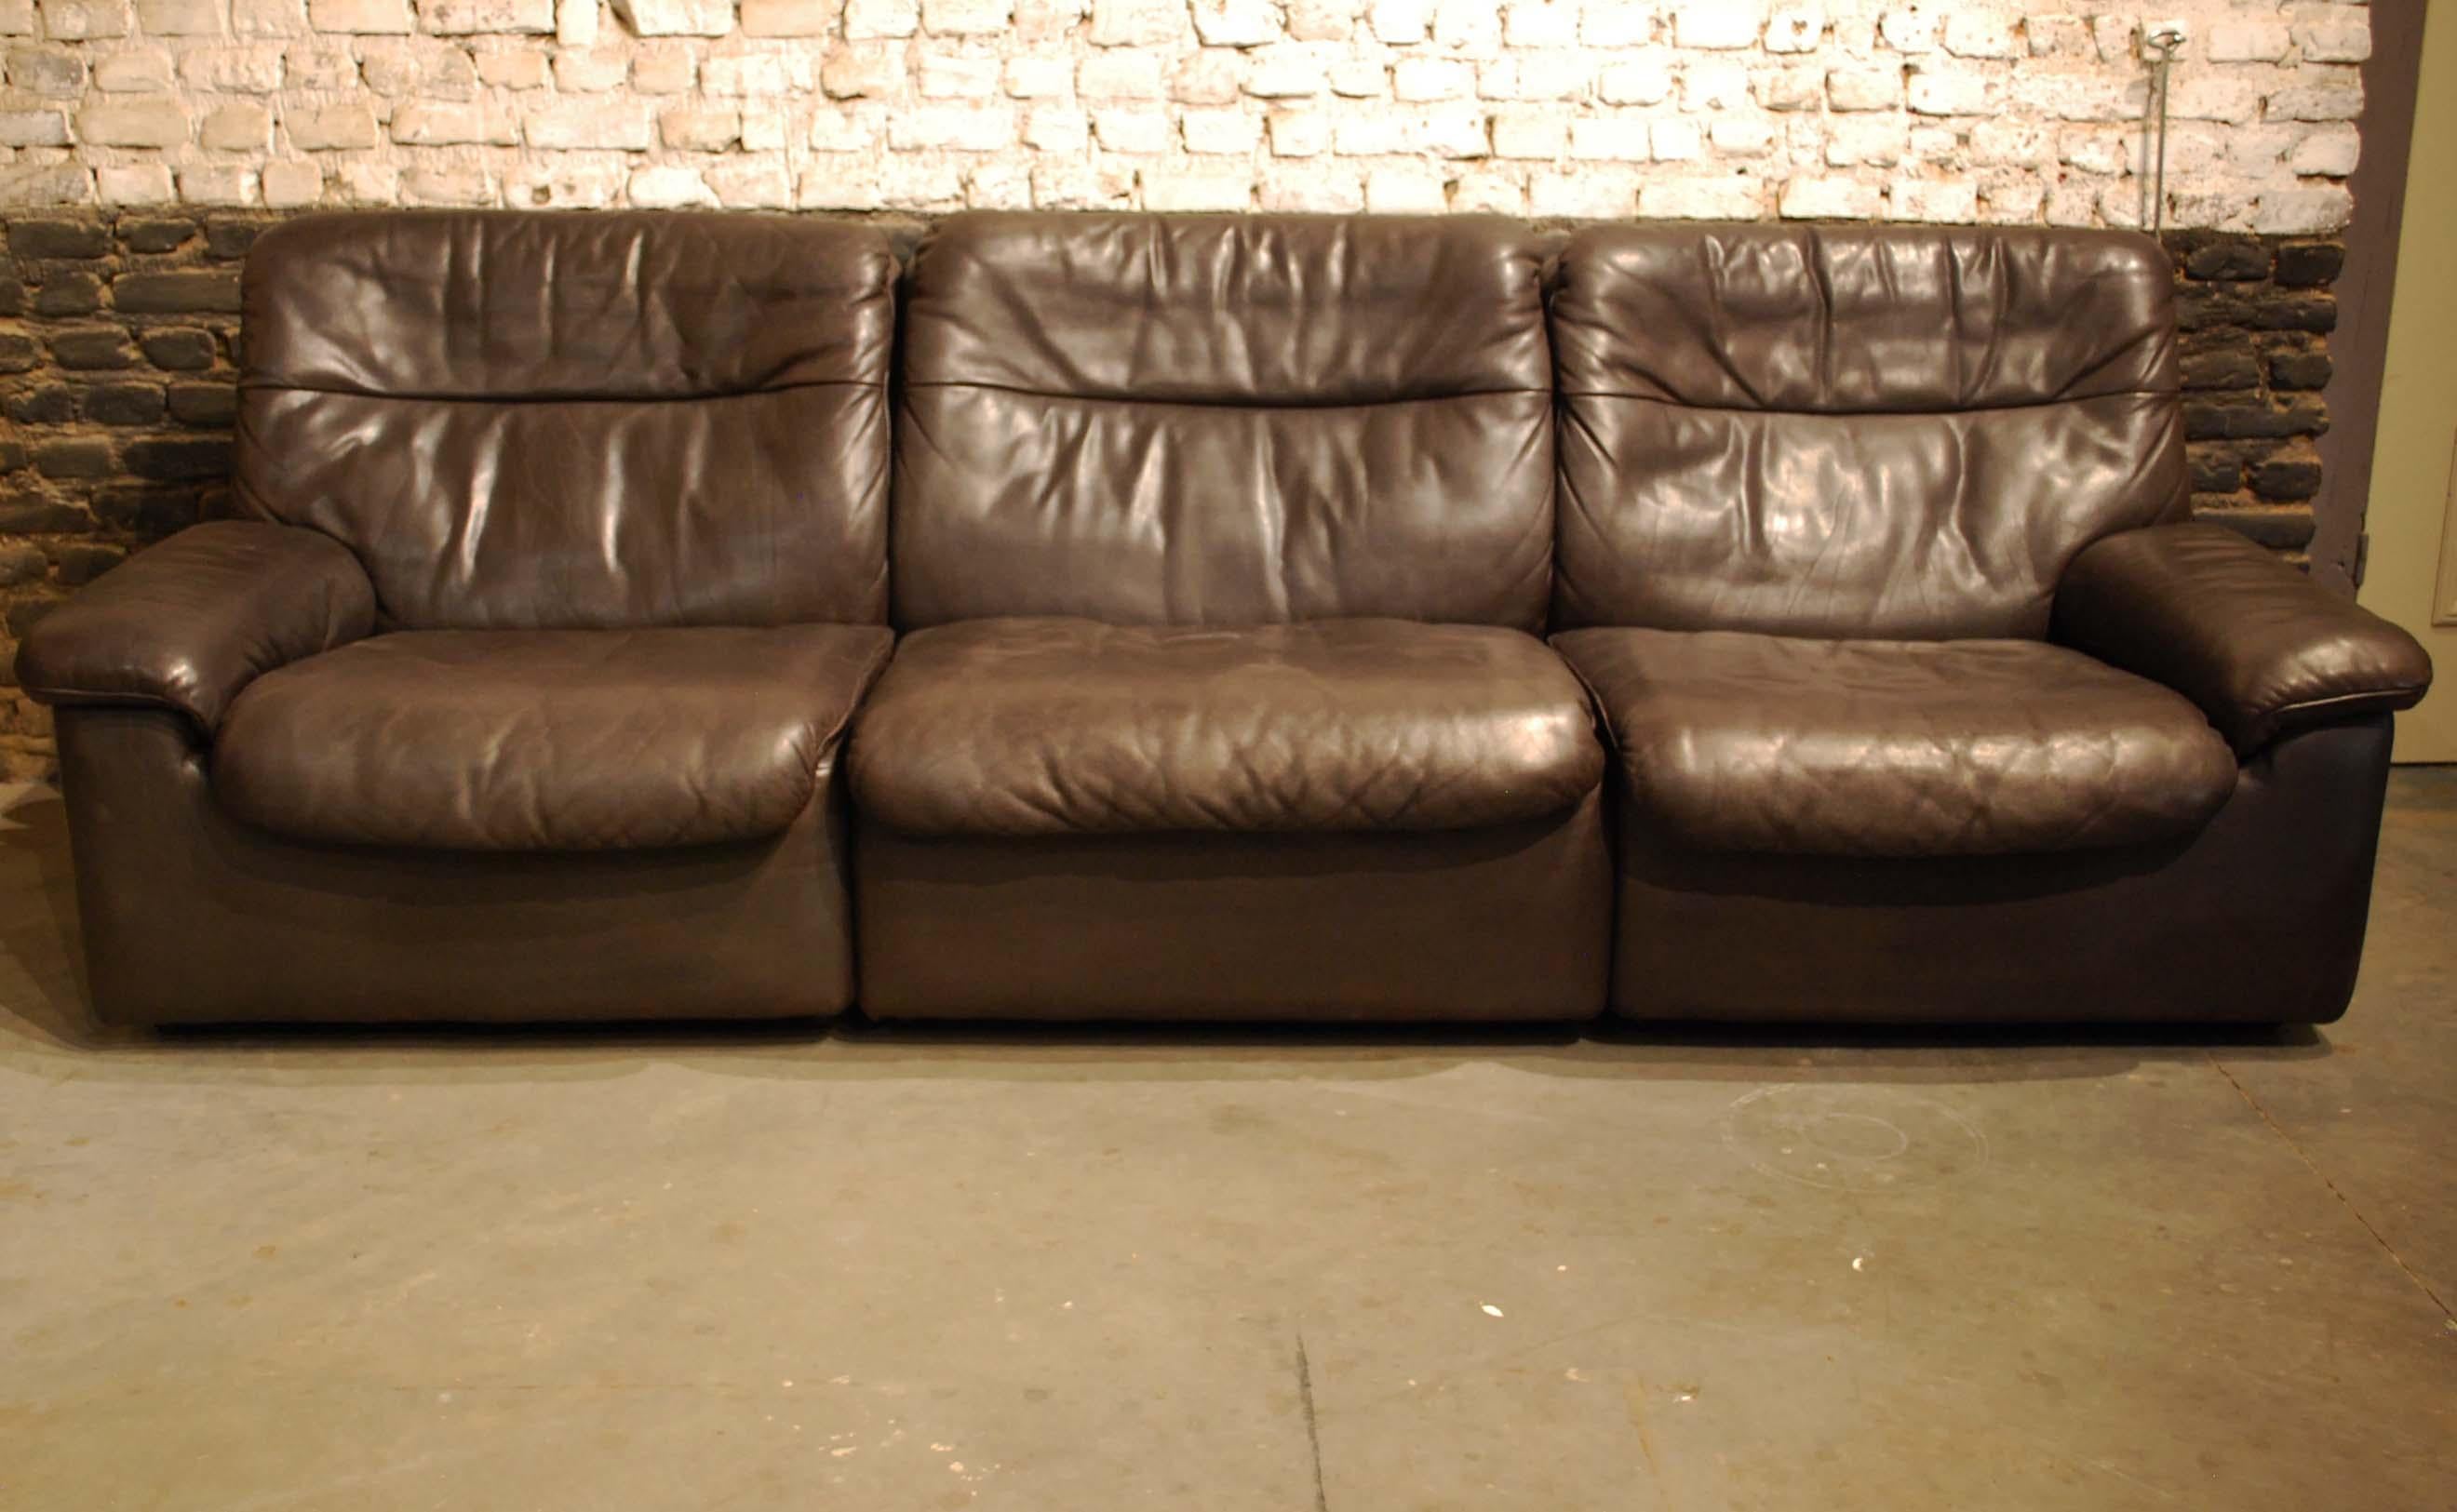 A beautiful leather De Sede DS-66 sofa set by Swiss furniture design company De Sede. 
A three-seat sofa and two lounge chairs. The set was made in the 1970s and a very soft chocolate brown leather was used for this seating arrangement. The